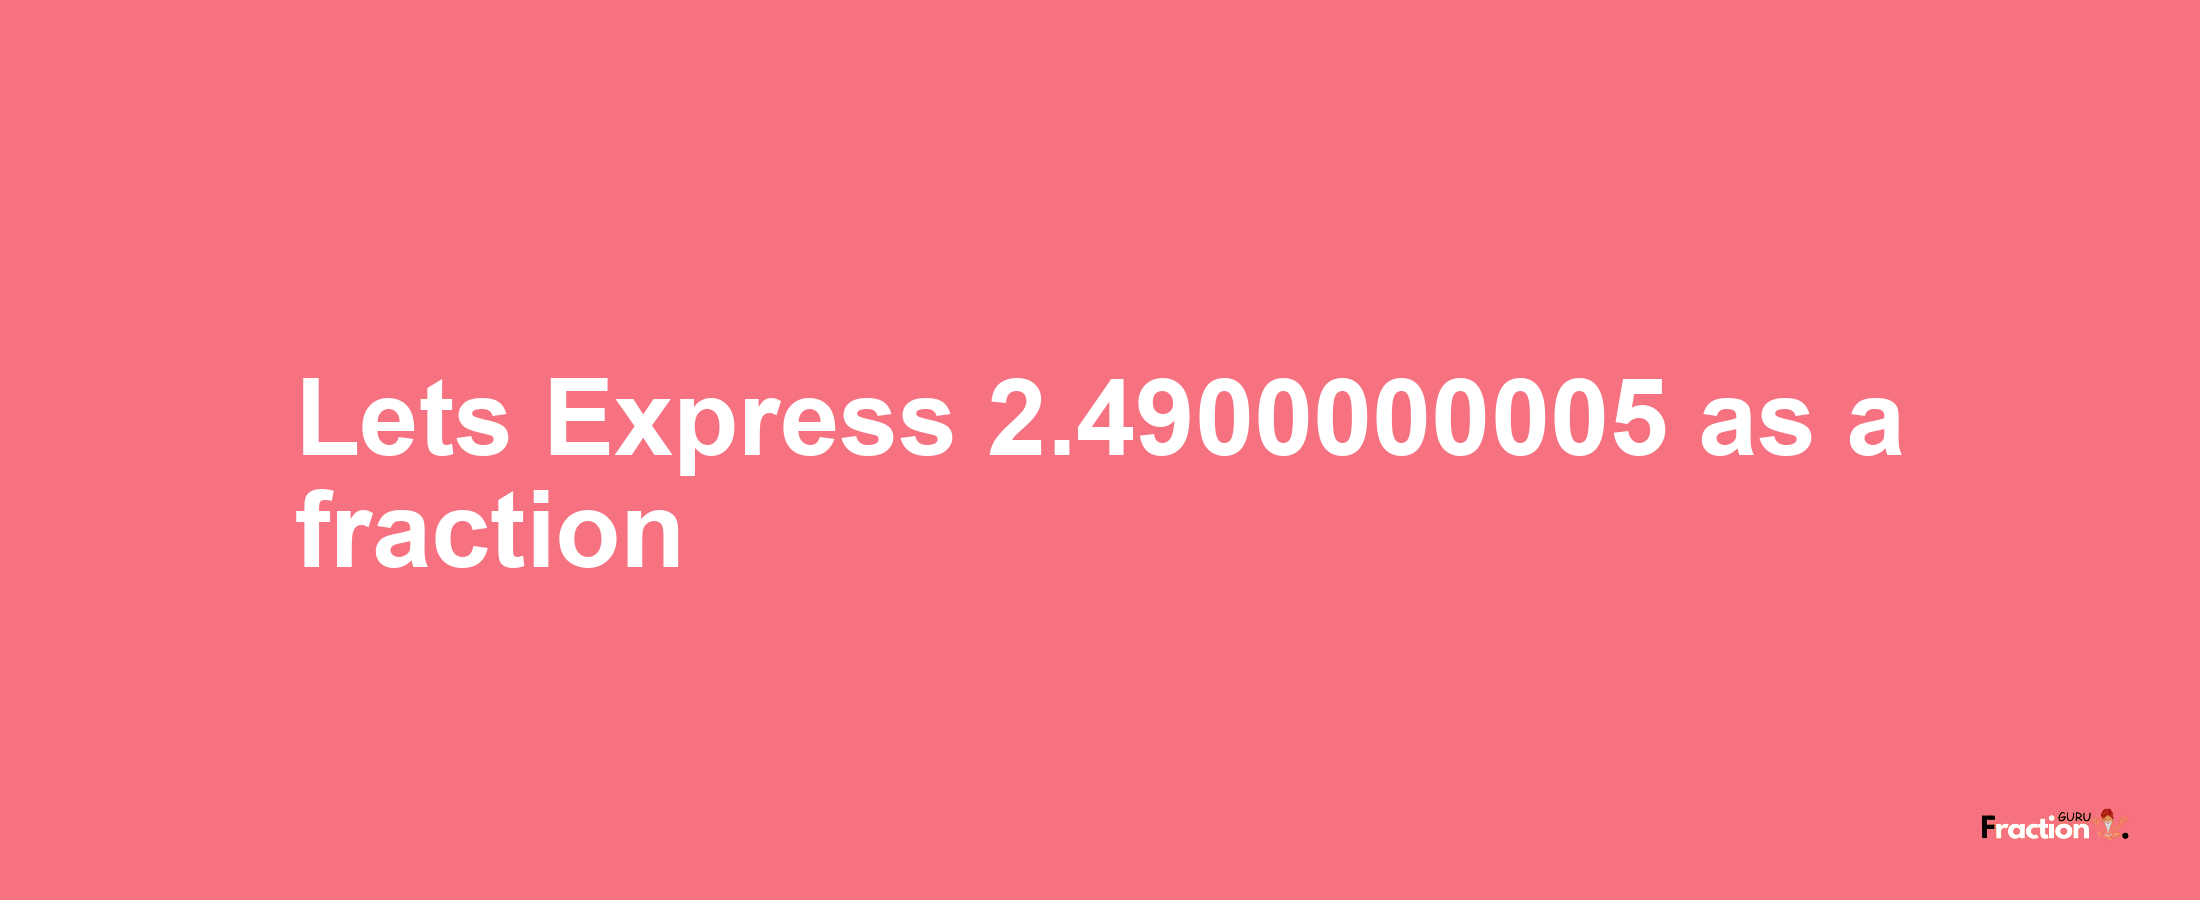 Lets Express 2.4900000005 as afraction